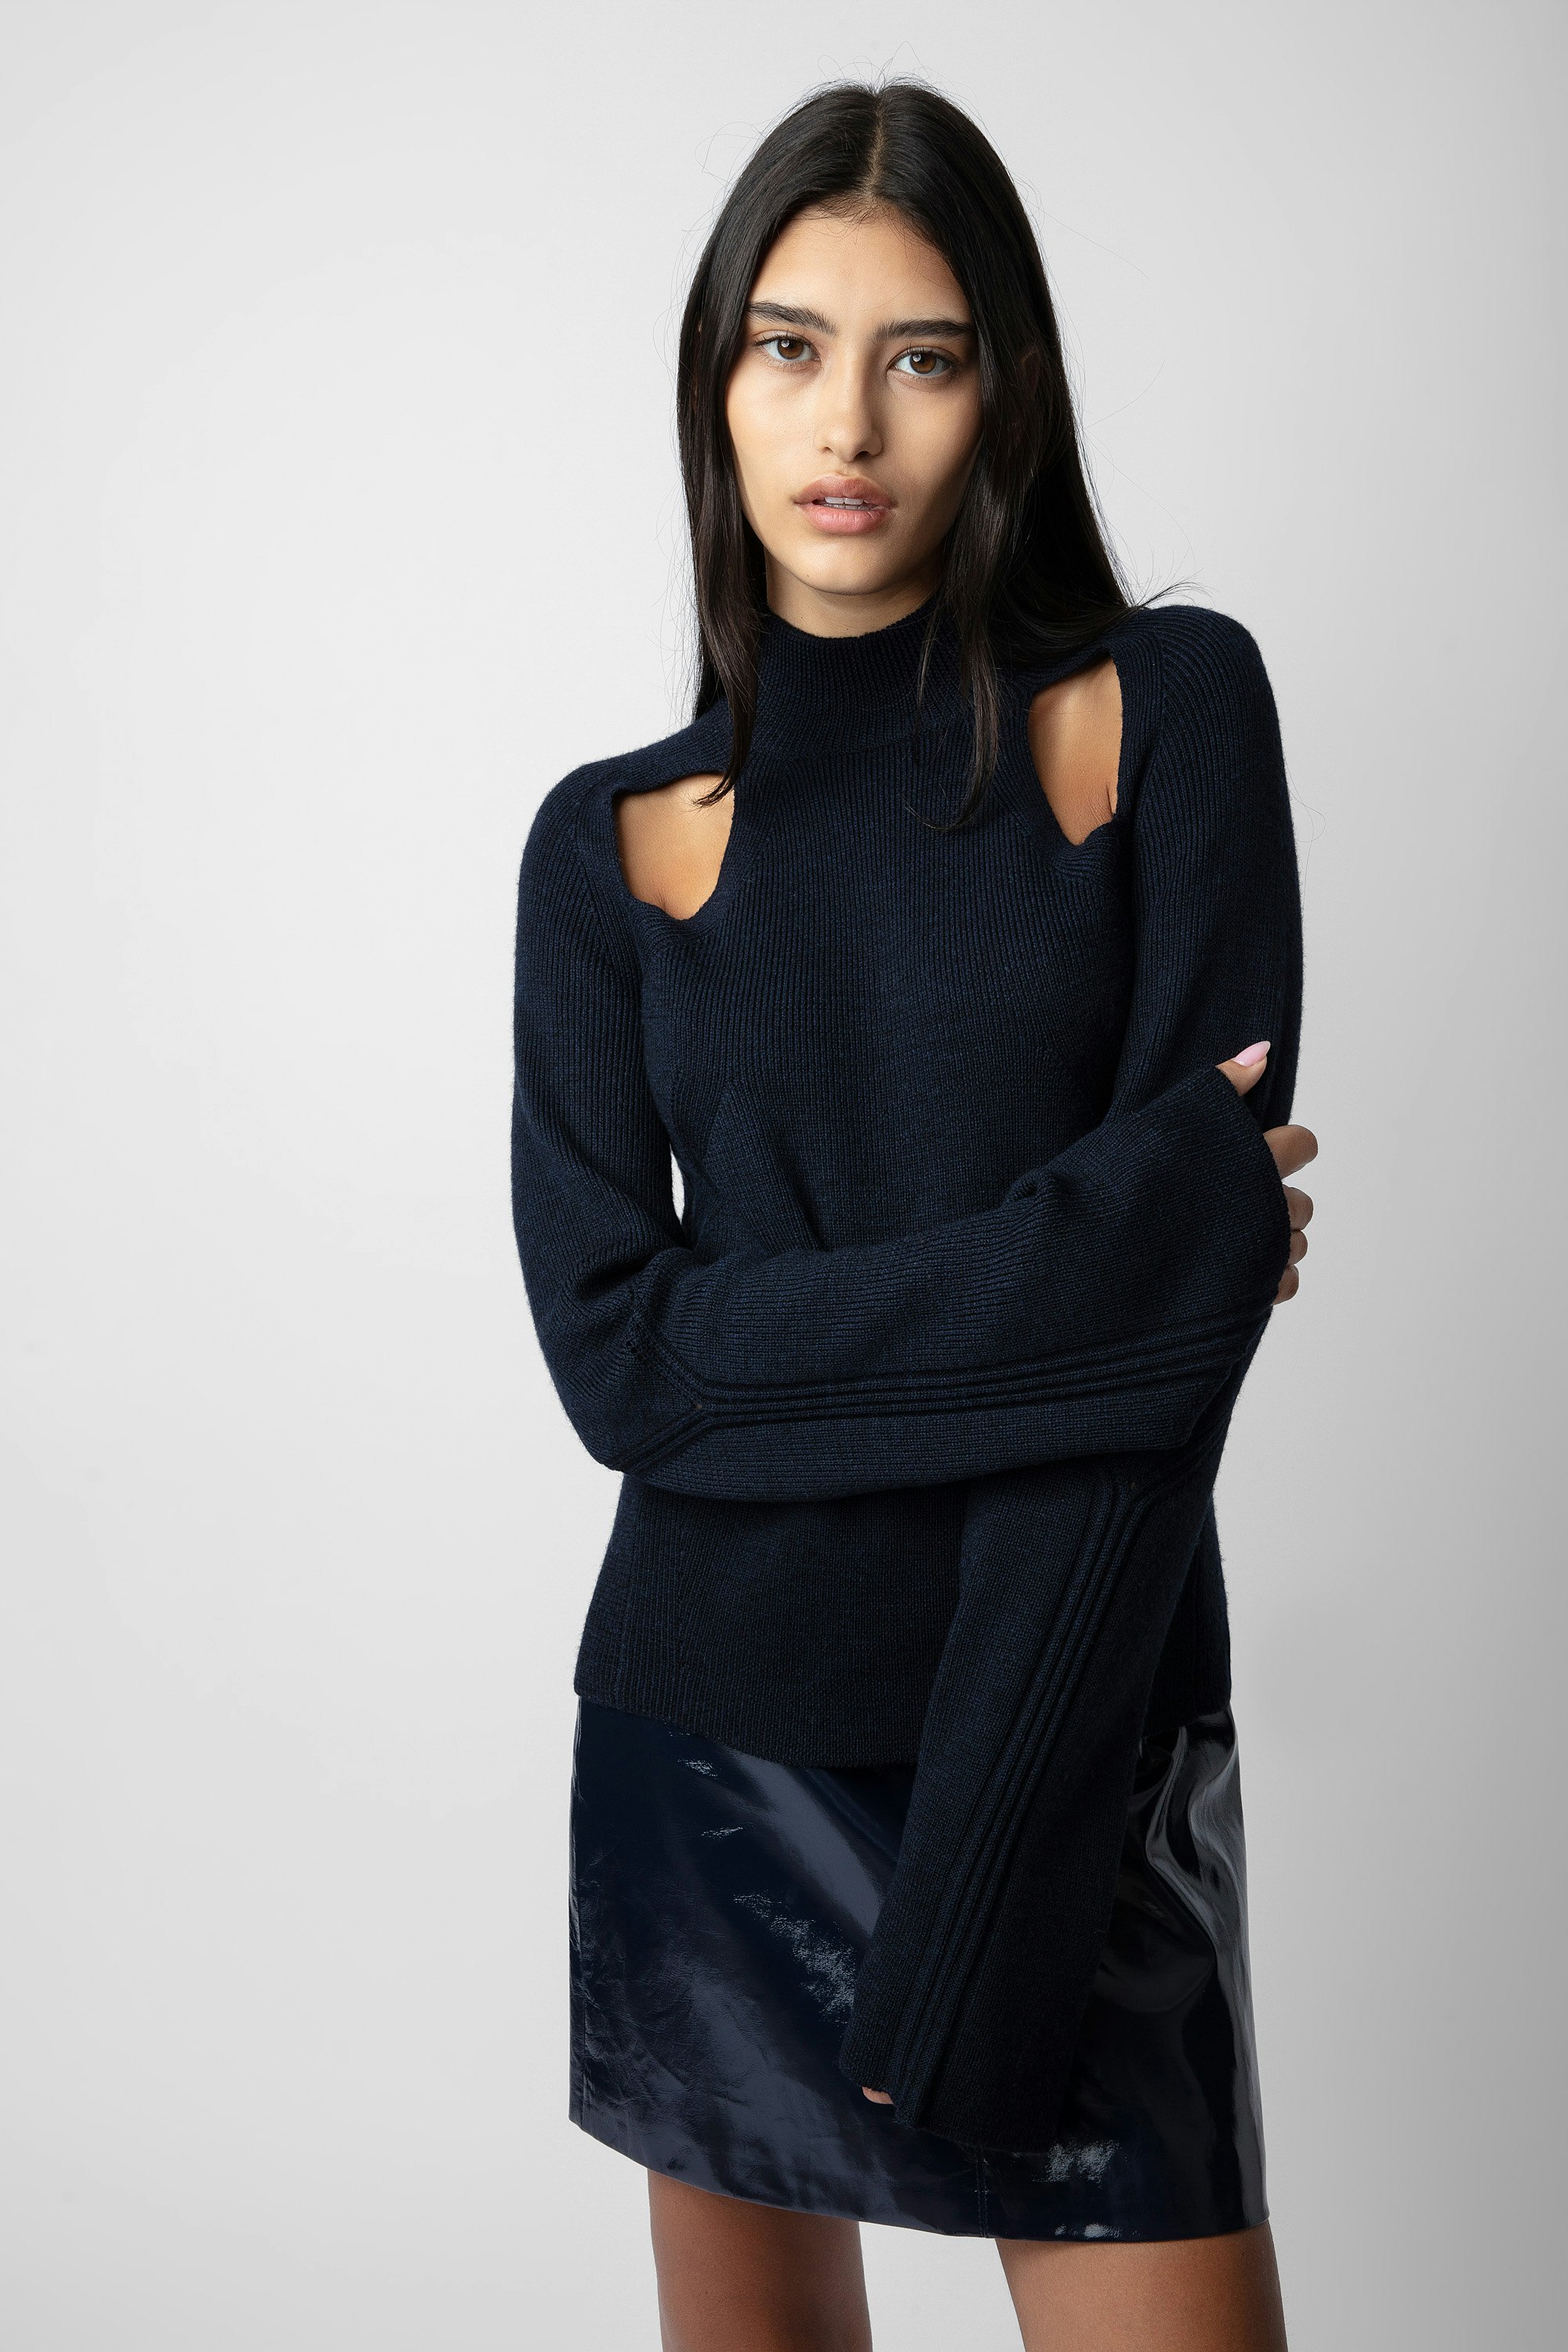 Micky Jumper - Women’s navy blue merino wool jumper with cut-outs on the shoulders and overstitching.